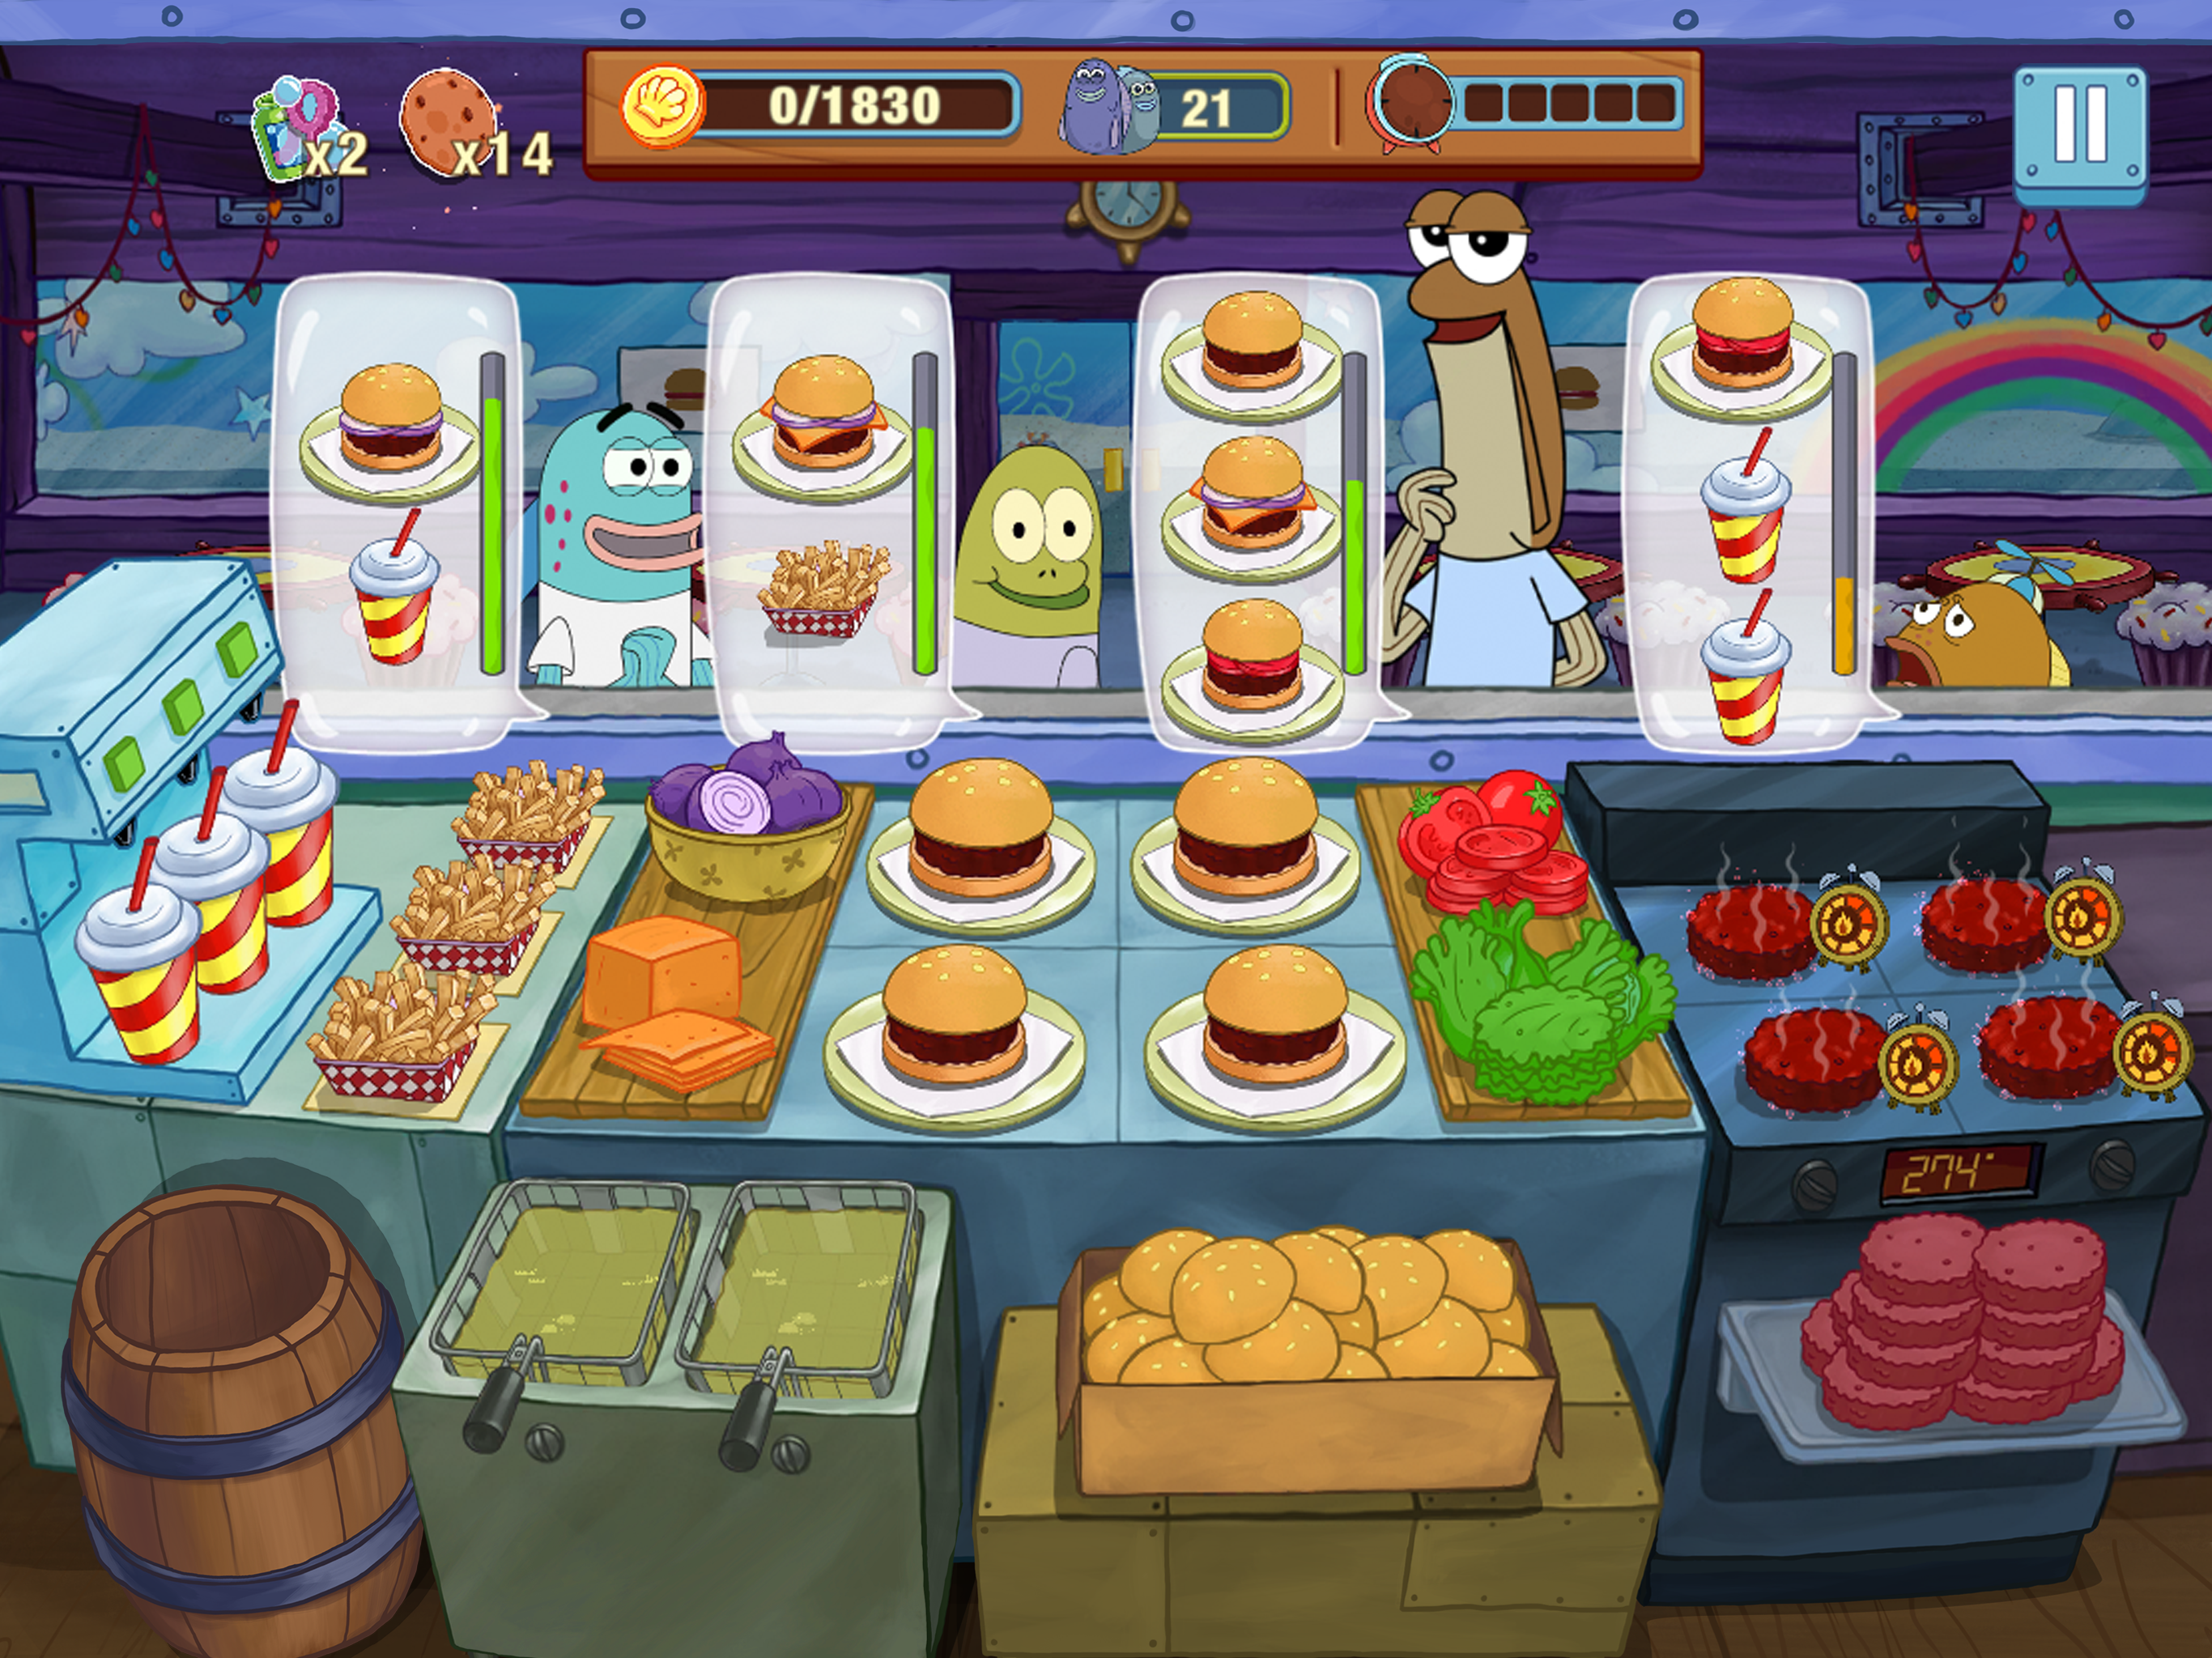 Cooking Fast: Hotdogs and Burgers Full Gameplay Walkthrough 